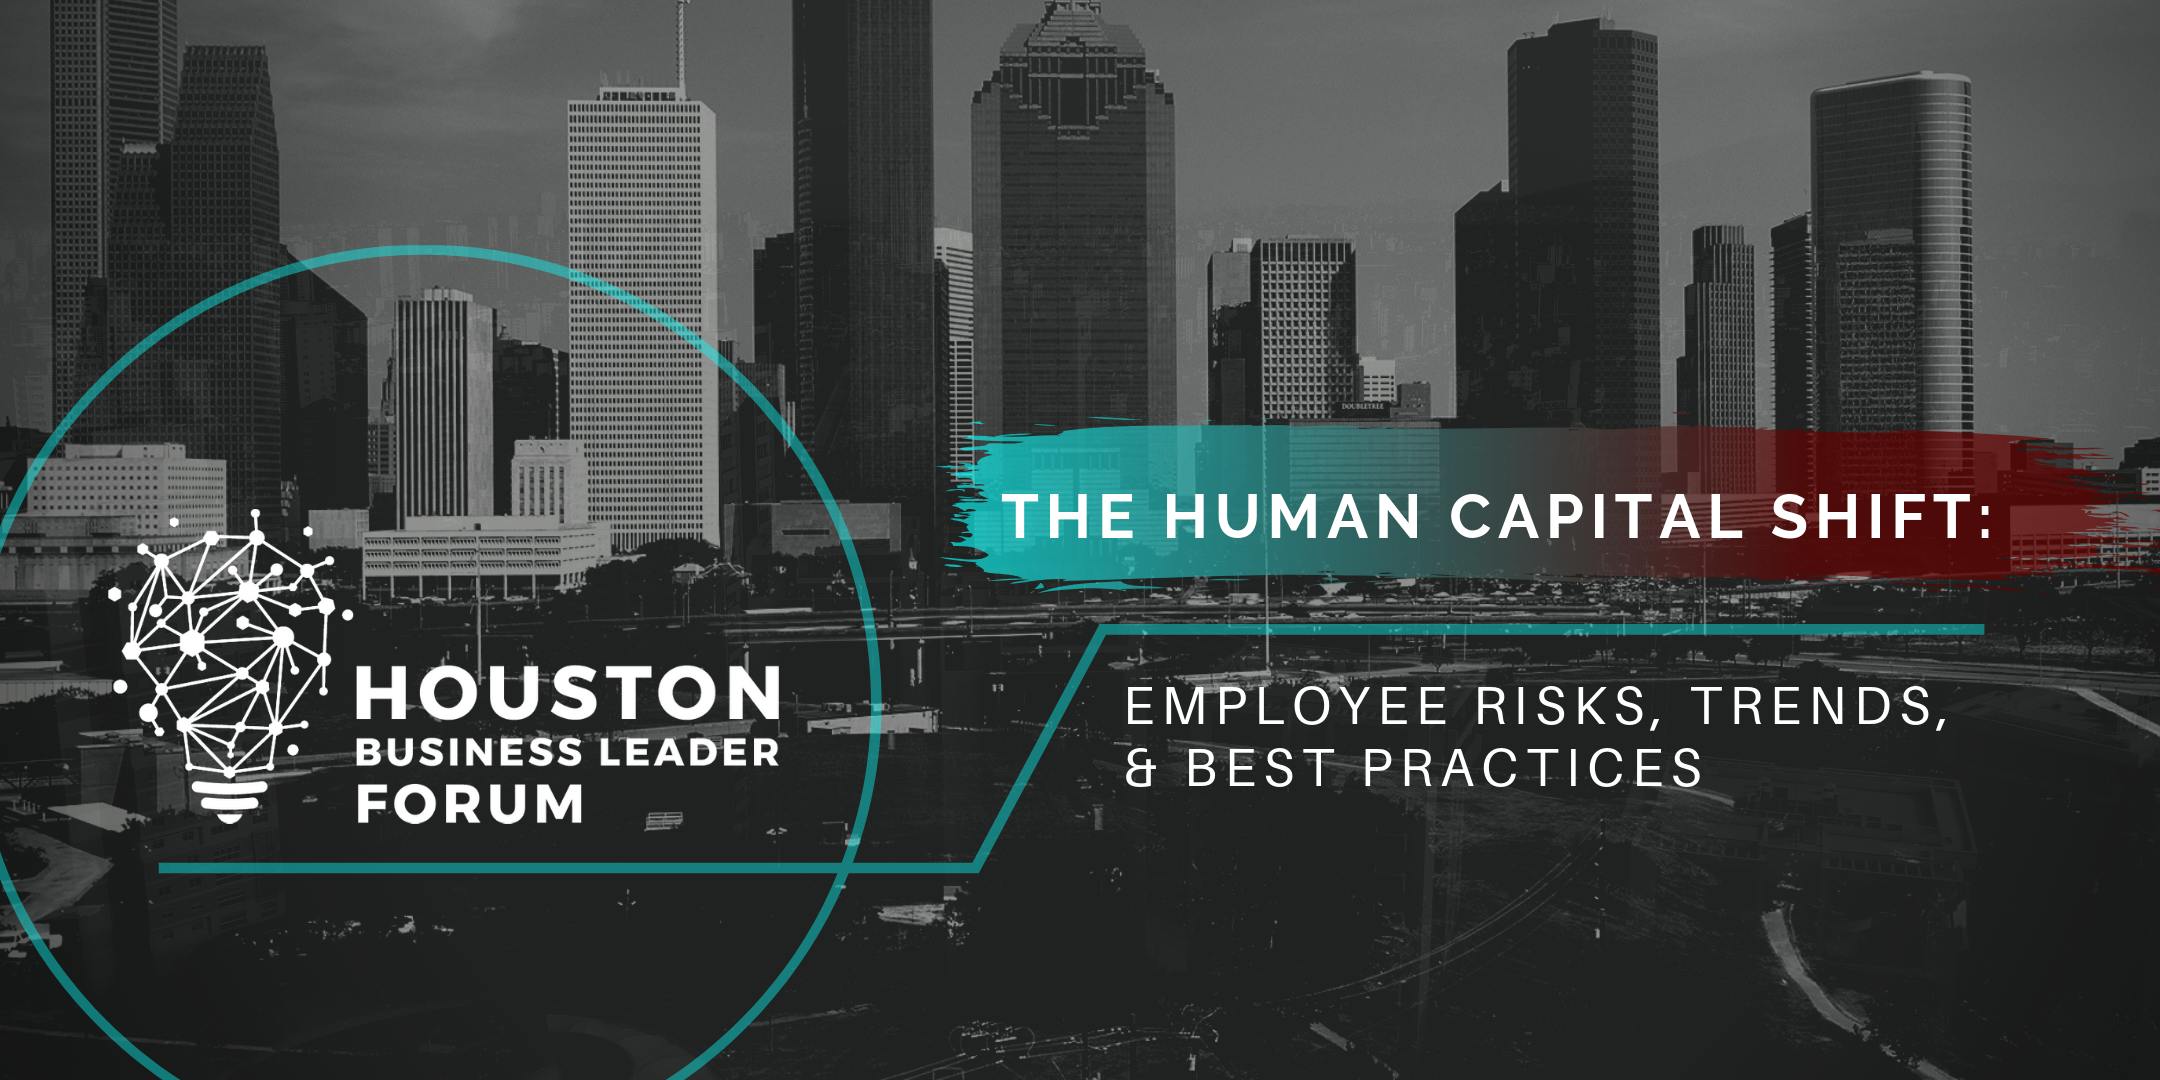 The Human Capital Shift: Employee Risks, Trends, and Best Practices 